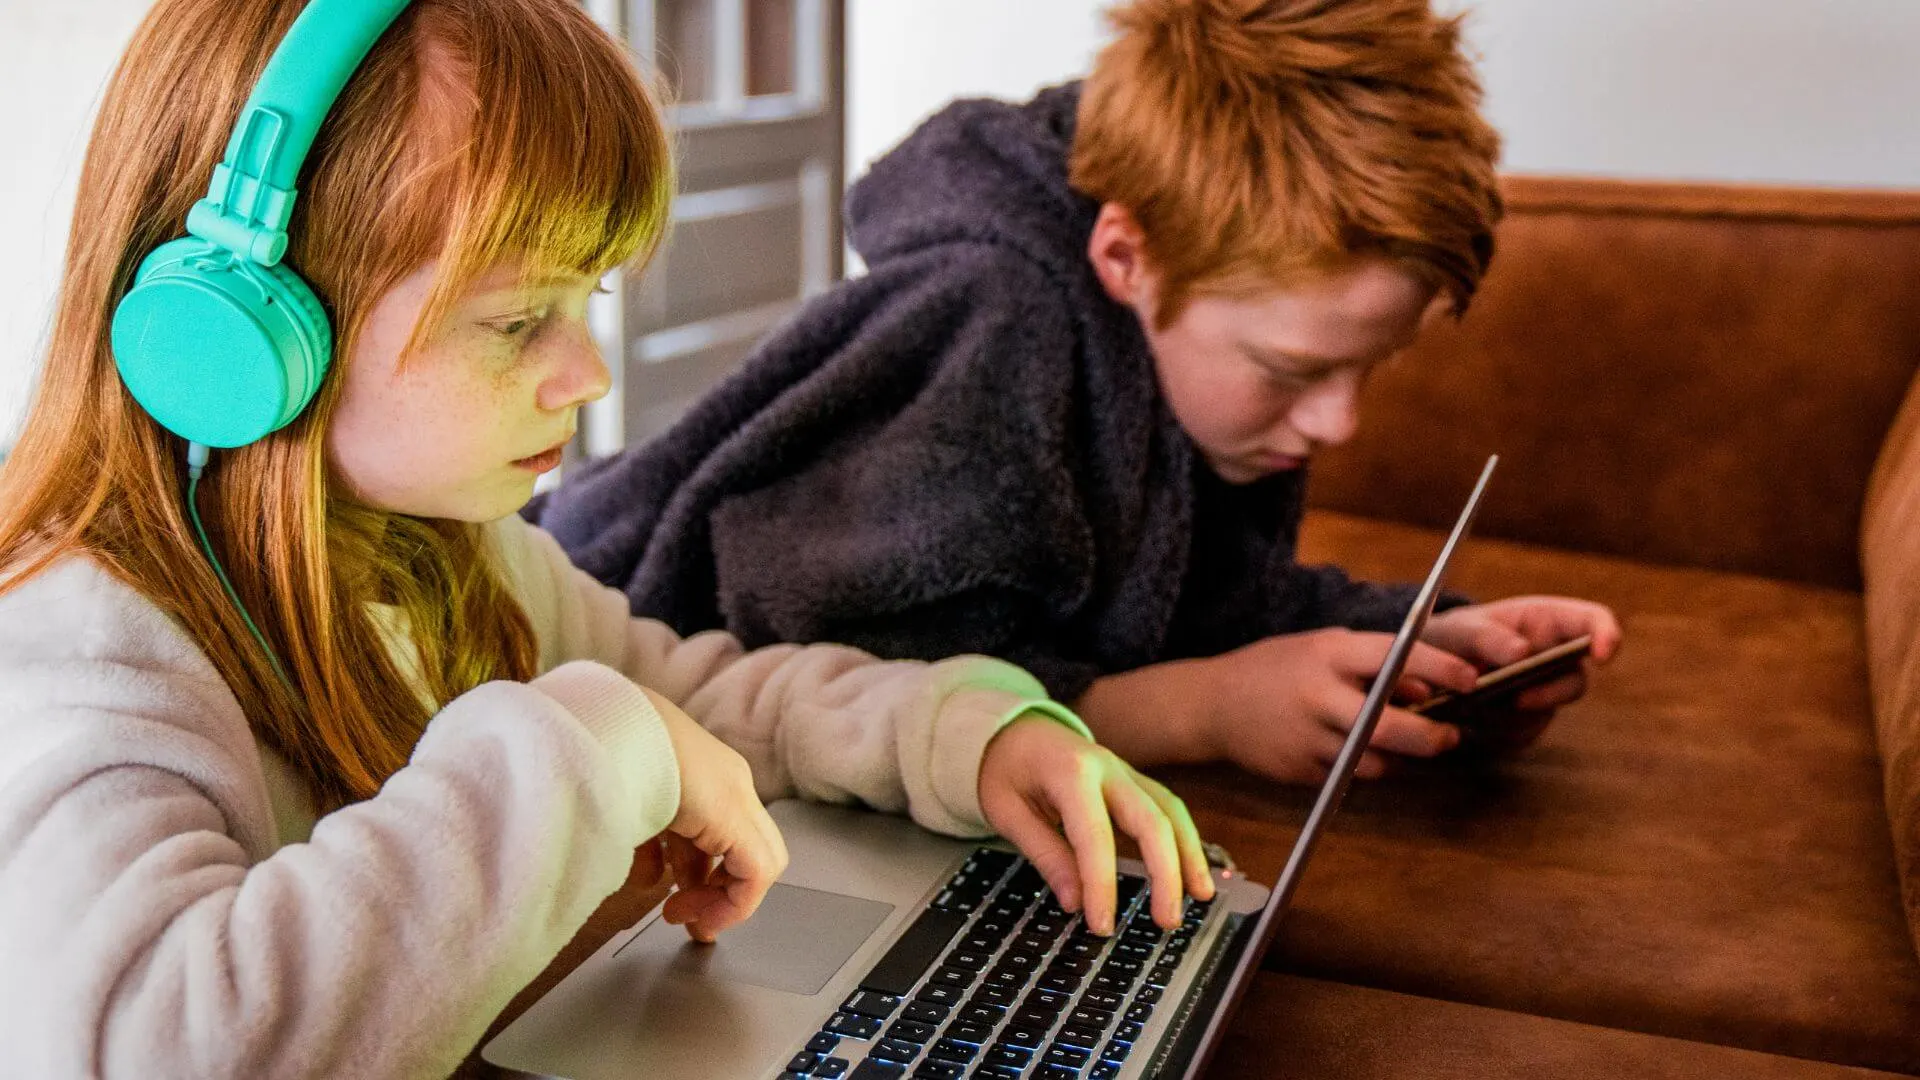 A Mother's Guide to Child Internet Safety